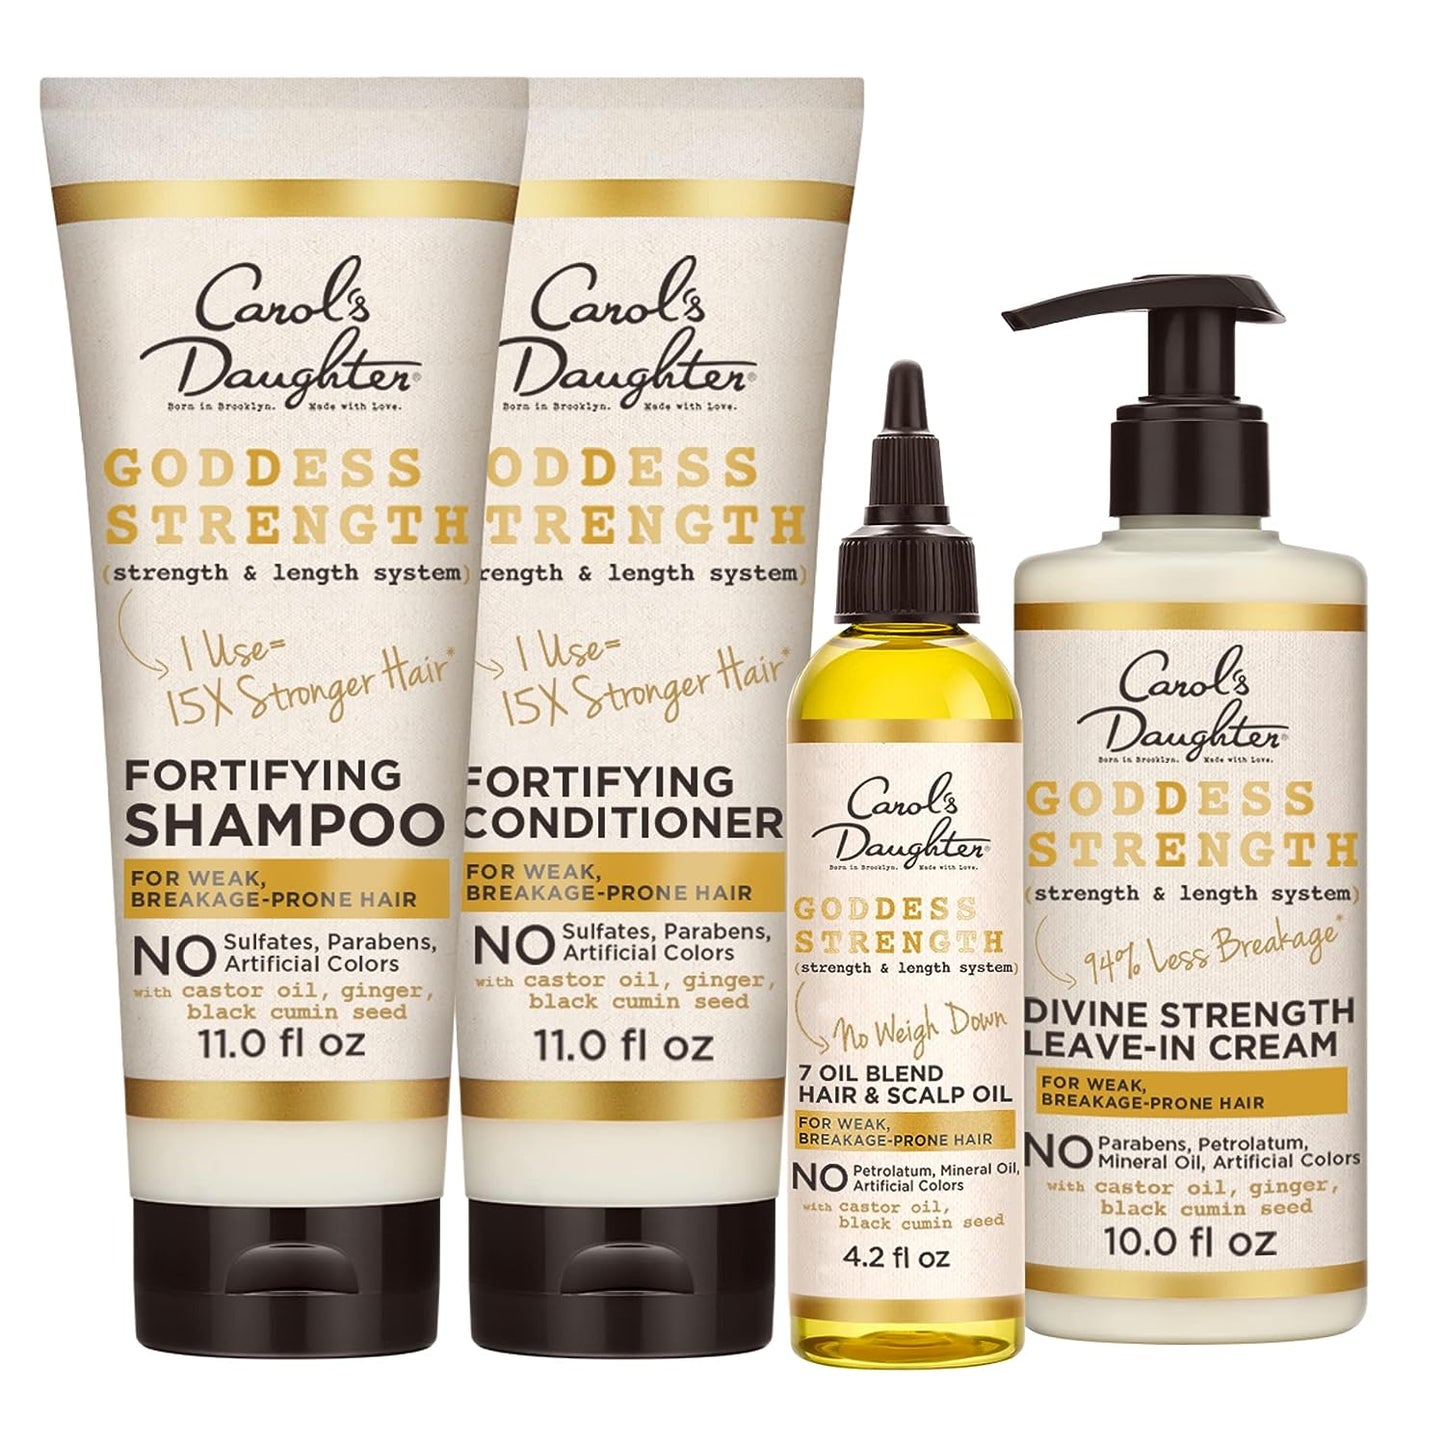 Carol's Daughter X The Color Purple The Strength of Gold Bundle: Goddess Strength Hair Kit with Sulfate Free Shampoo, Sulfate Free Conditioner, Leave In Conditioner and Scalp and Hair Oil, 4 Products